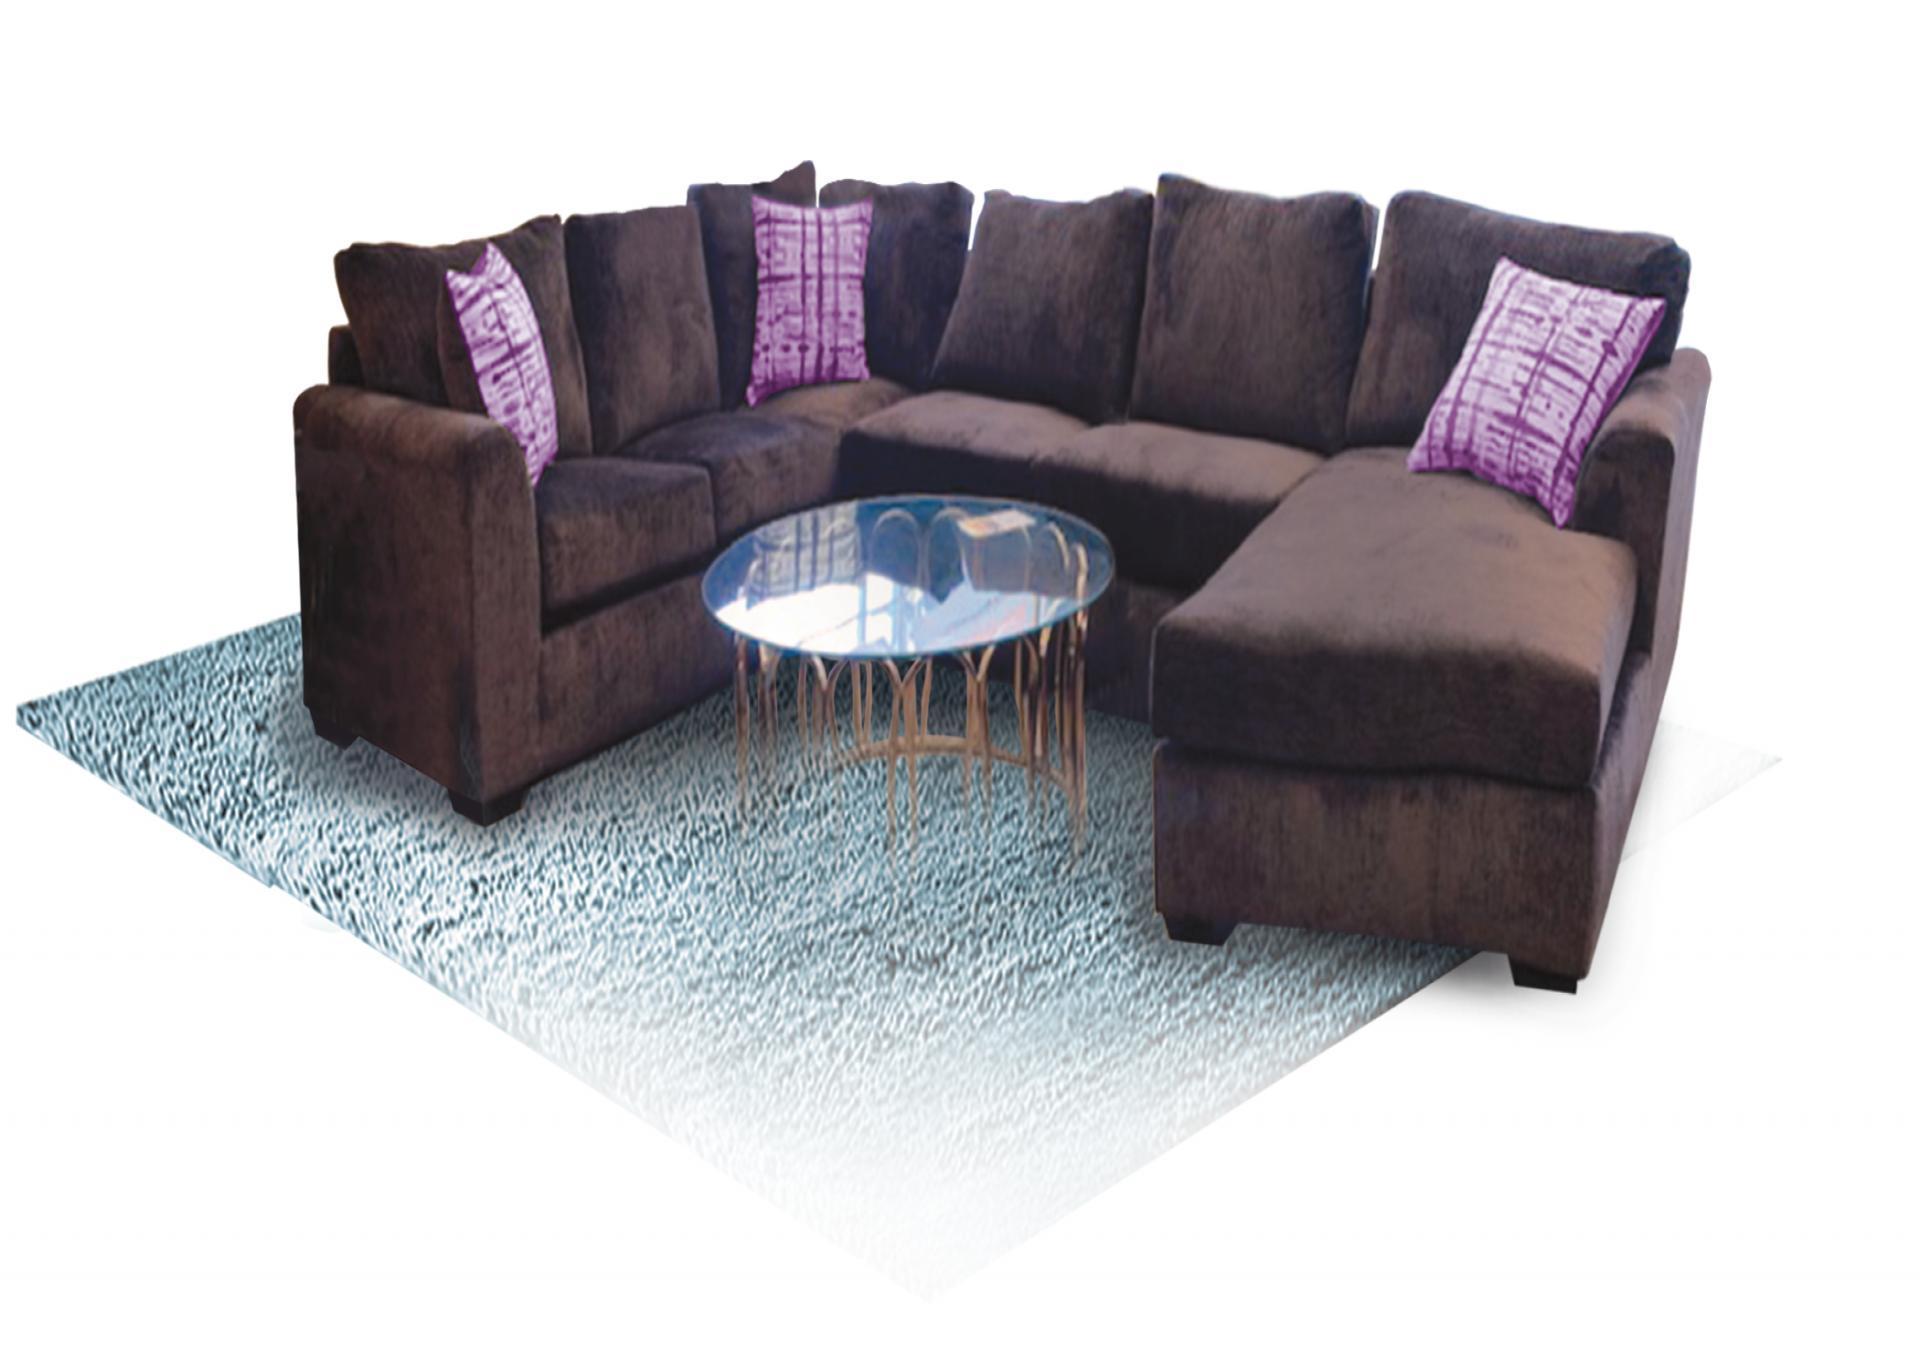 Chocolate 3pc Sectional with Chaise and accent pillows